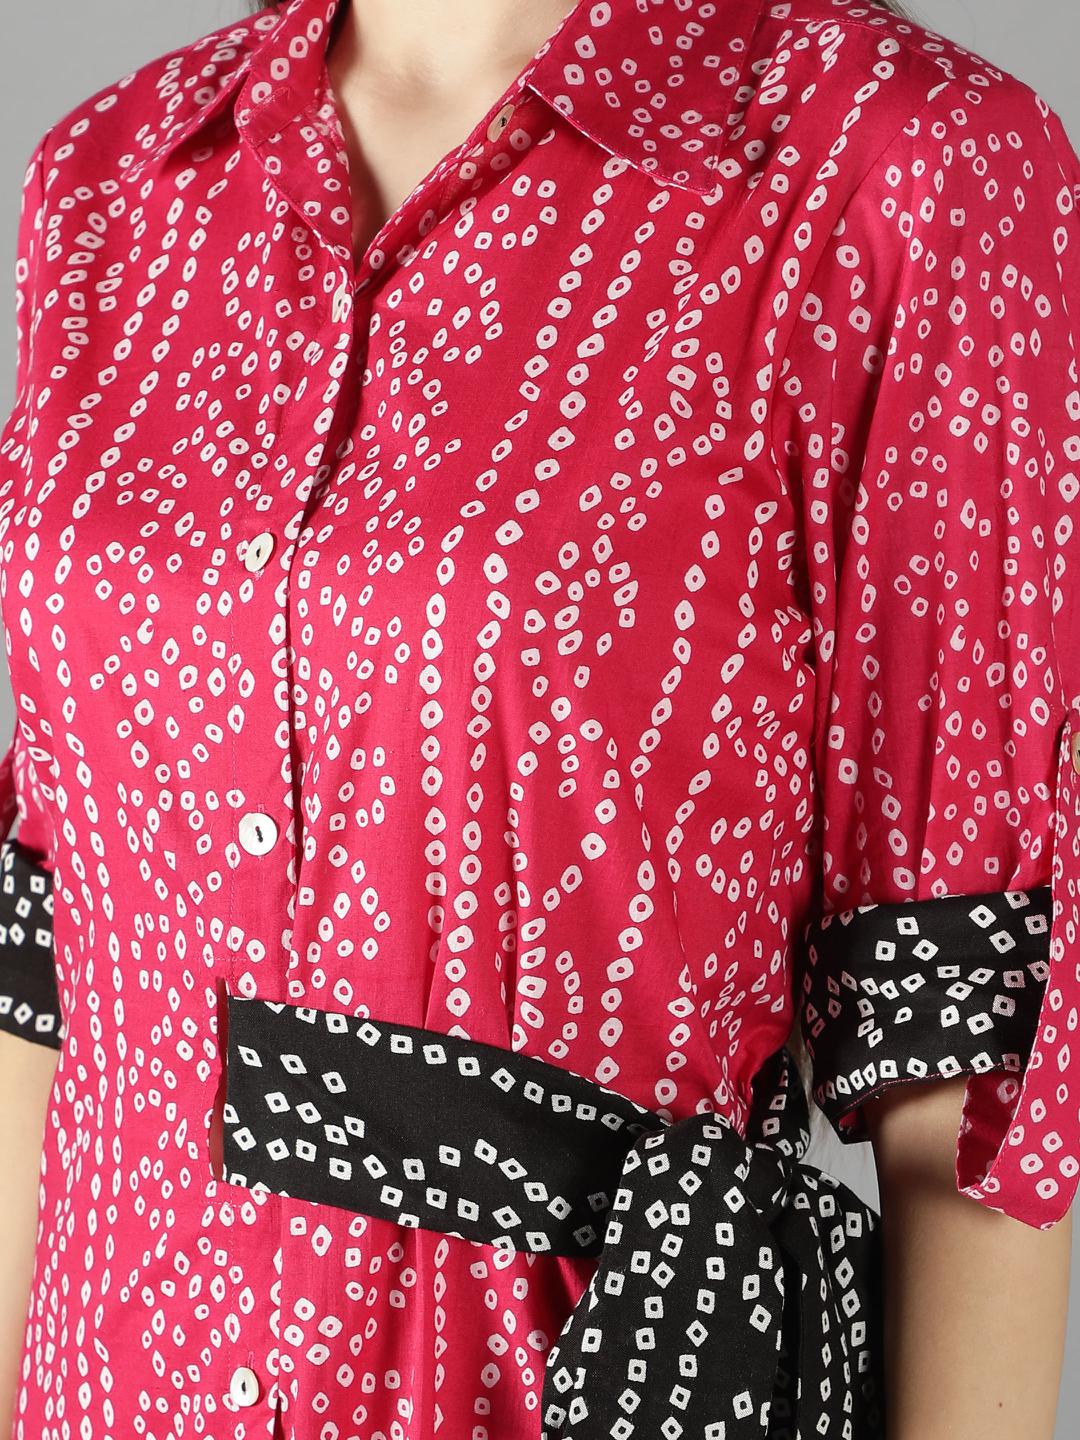 fuschia-pink-bhandej-print-side-tie-up-shirt-with-statement-pants-11740126PK, Women Clothing, Cotton Matching Set